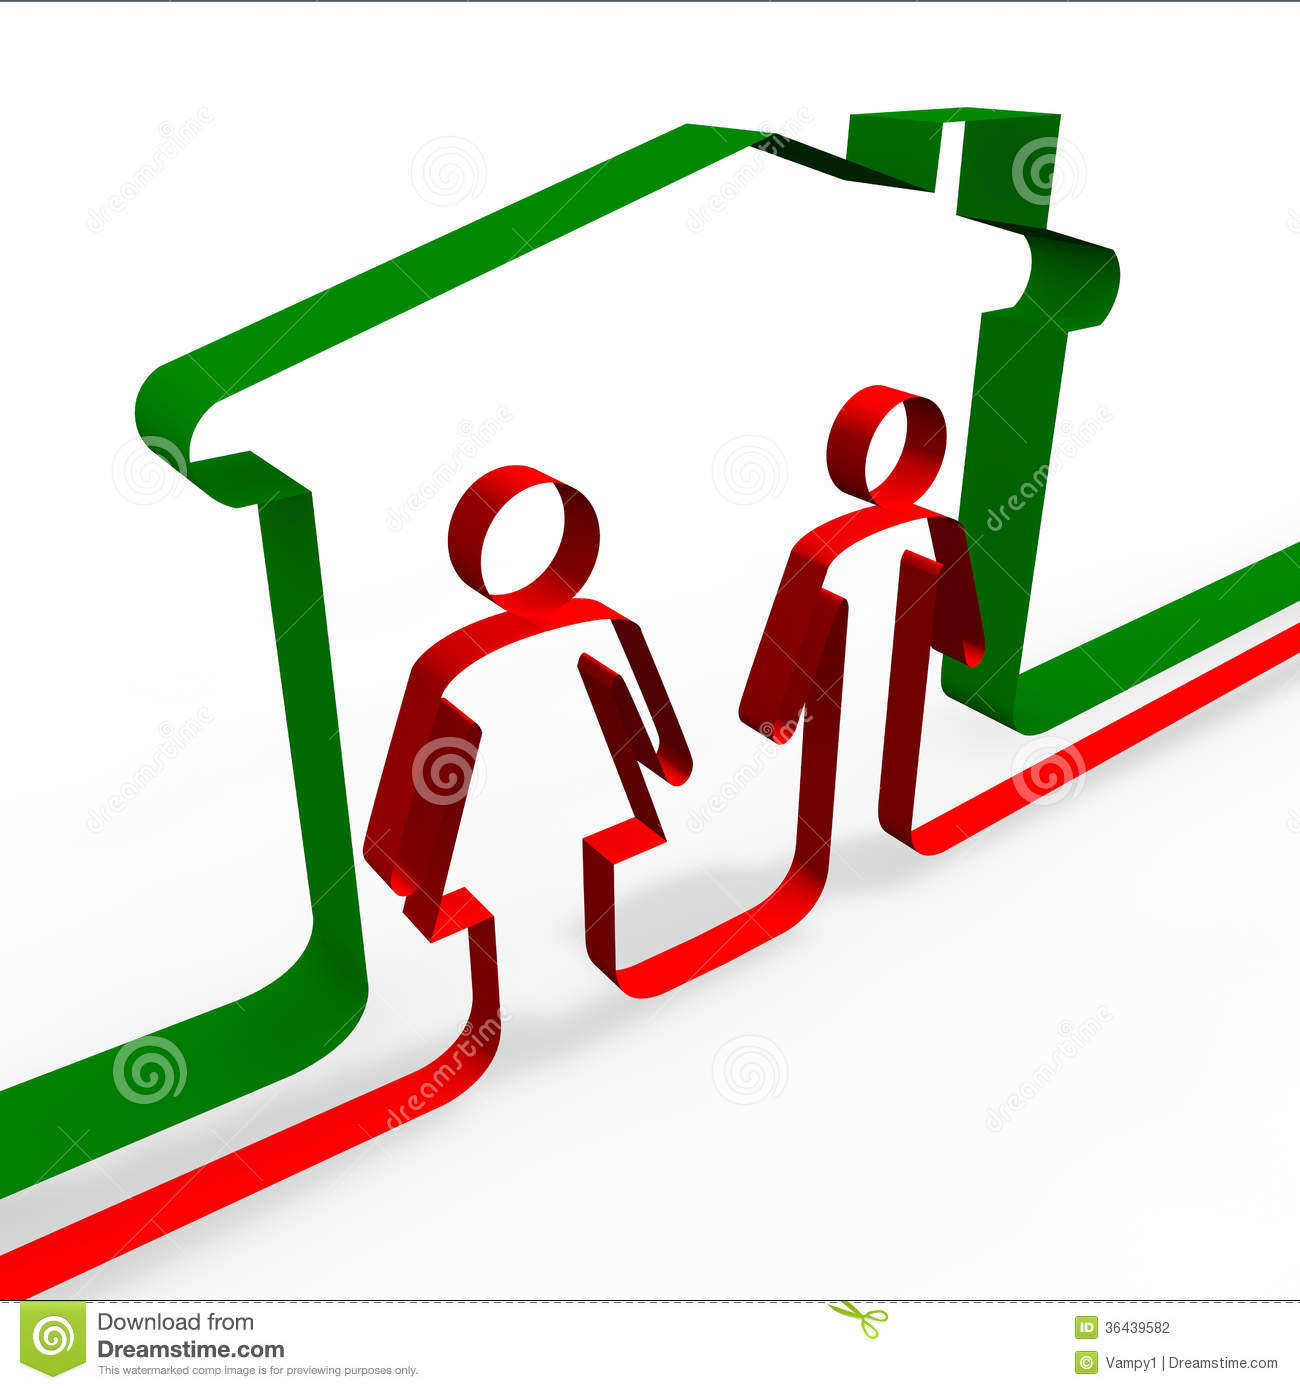 Symbol Of Man And Woman Made With A Ribbon  Family Home Sales Tax